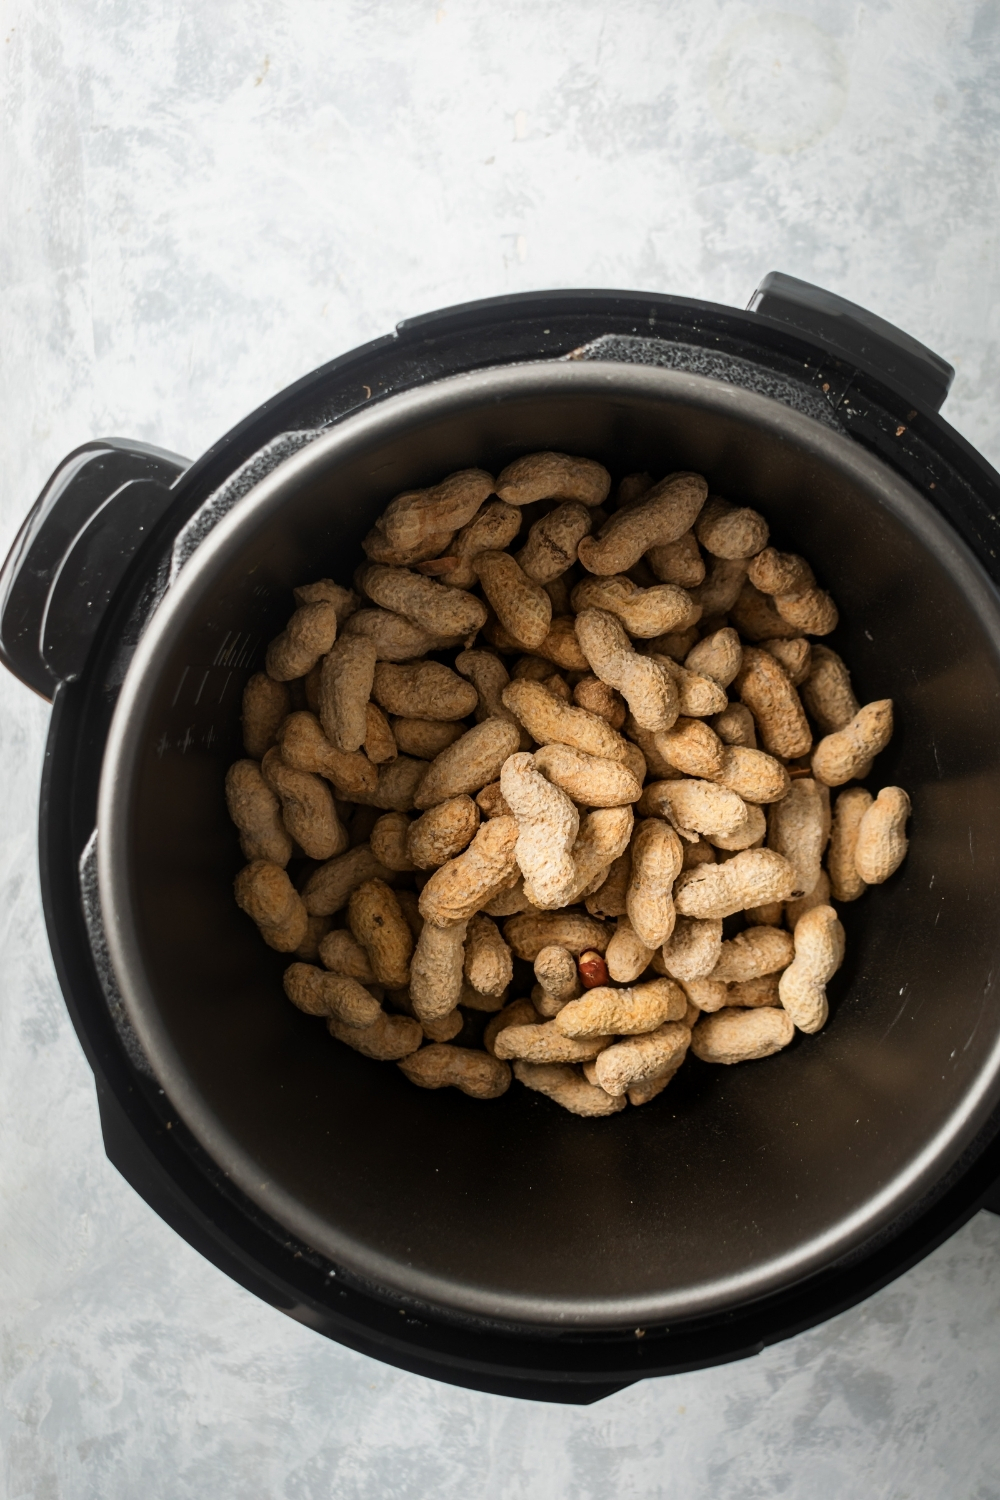 Shelled peanuts in an instant pot.